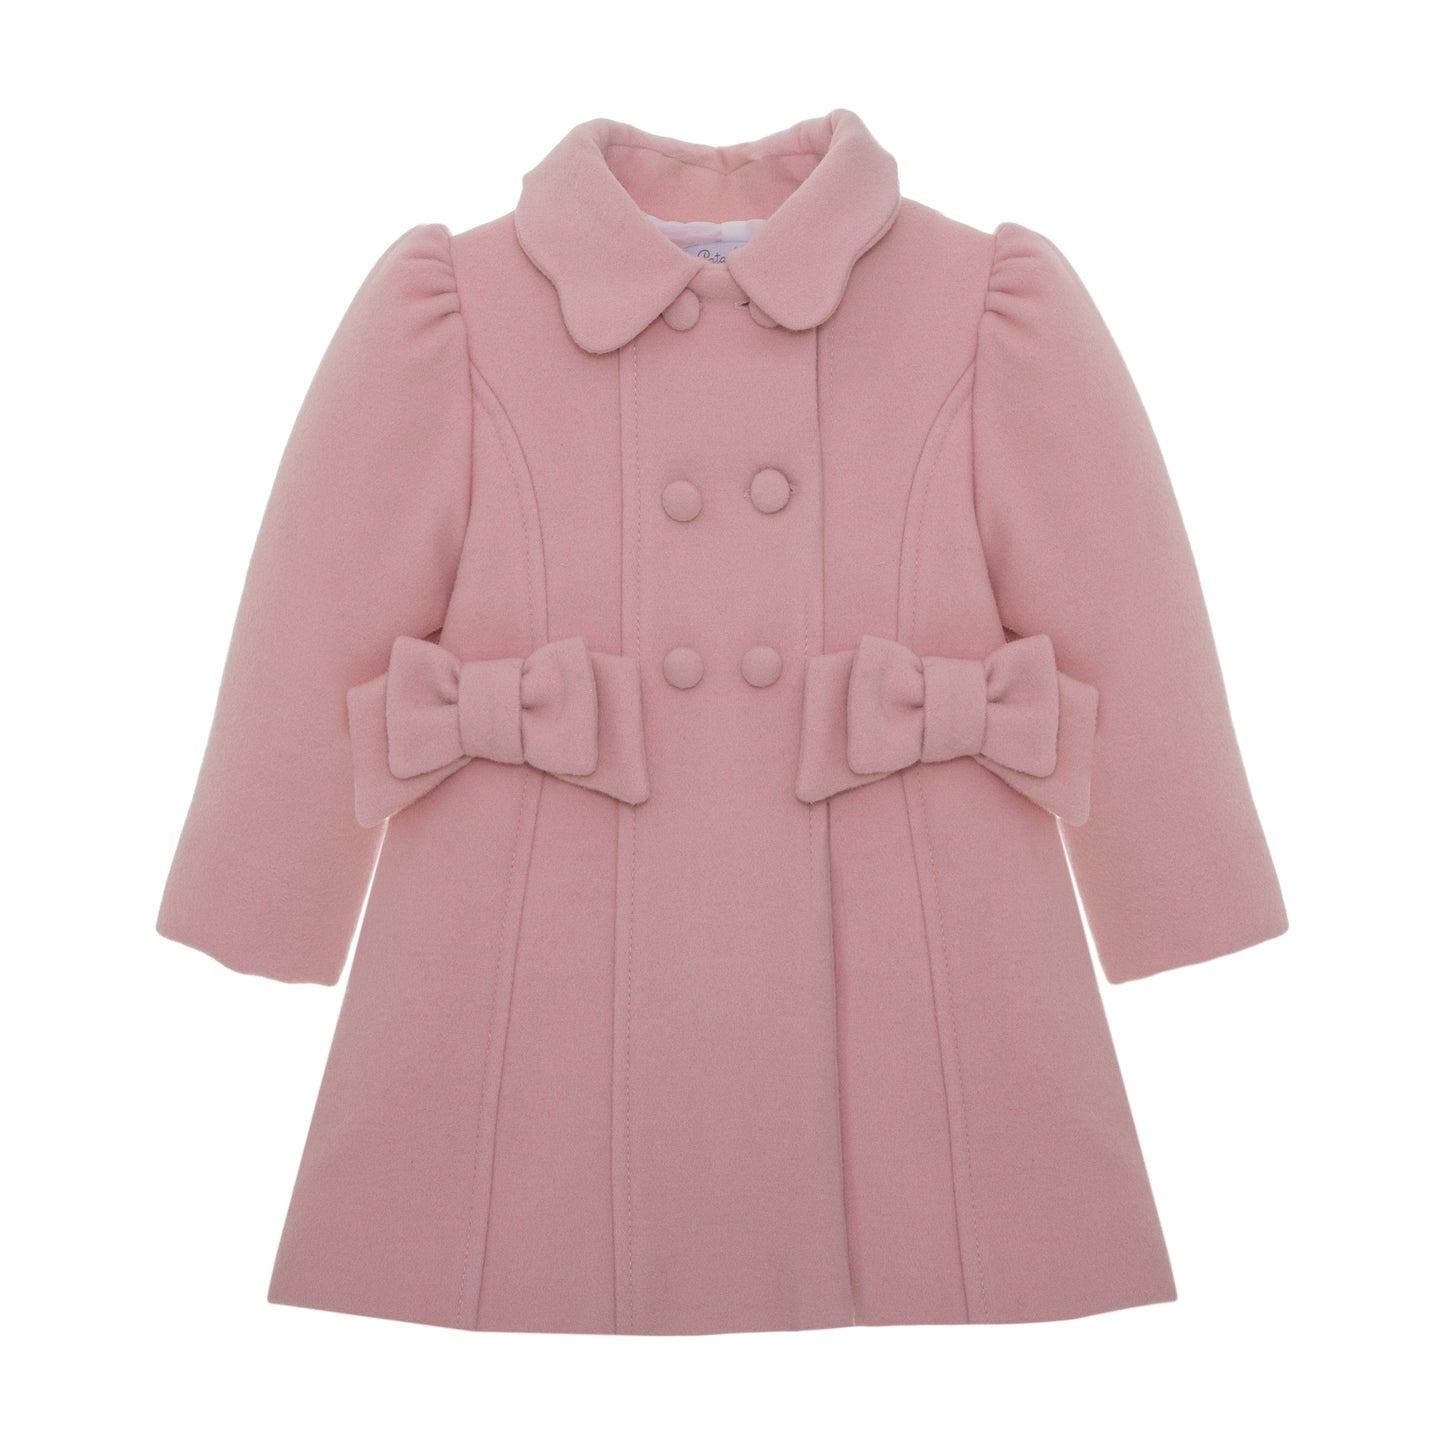 Pink Coat with Bow Pocket